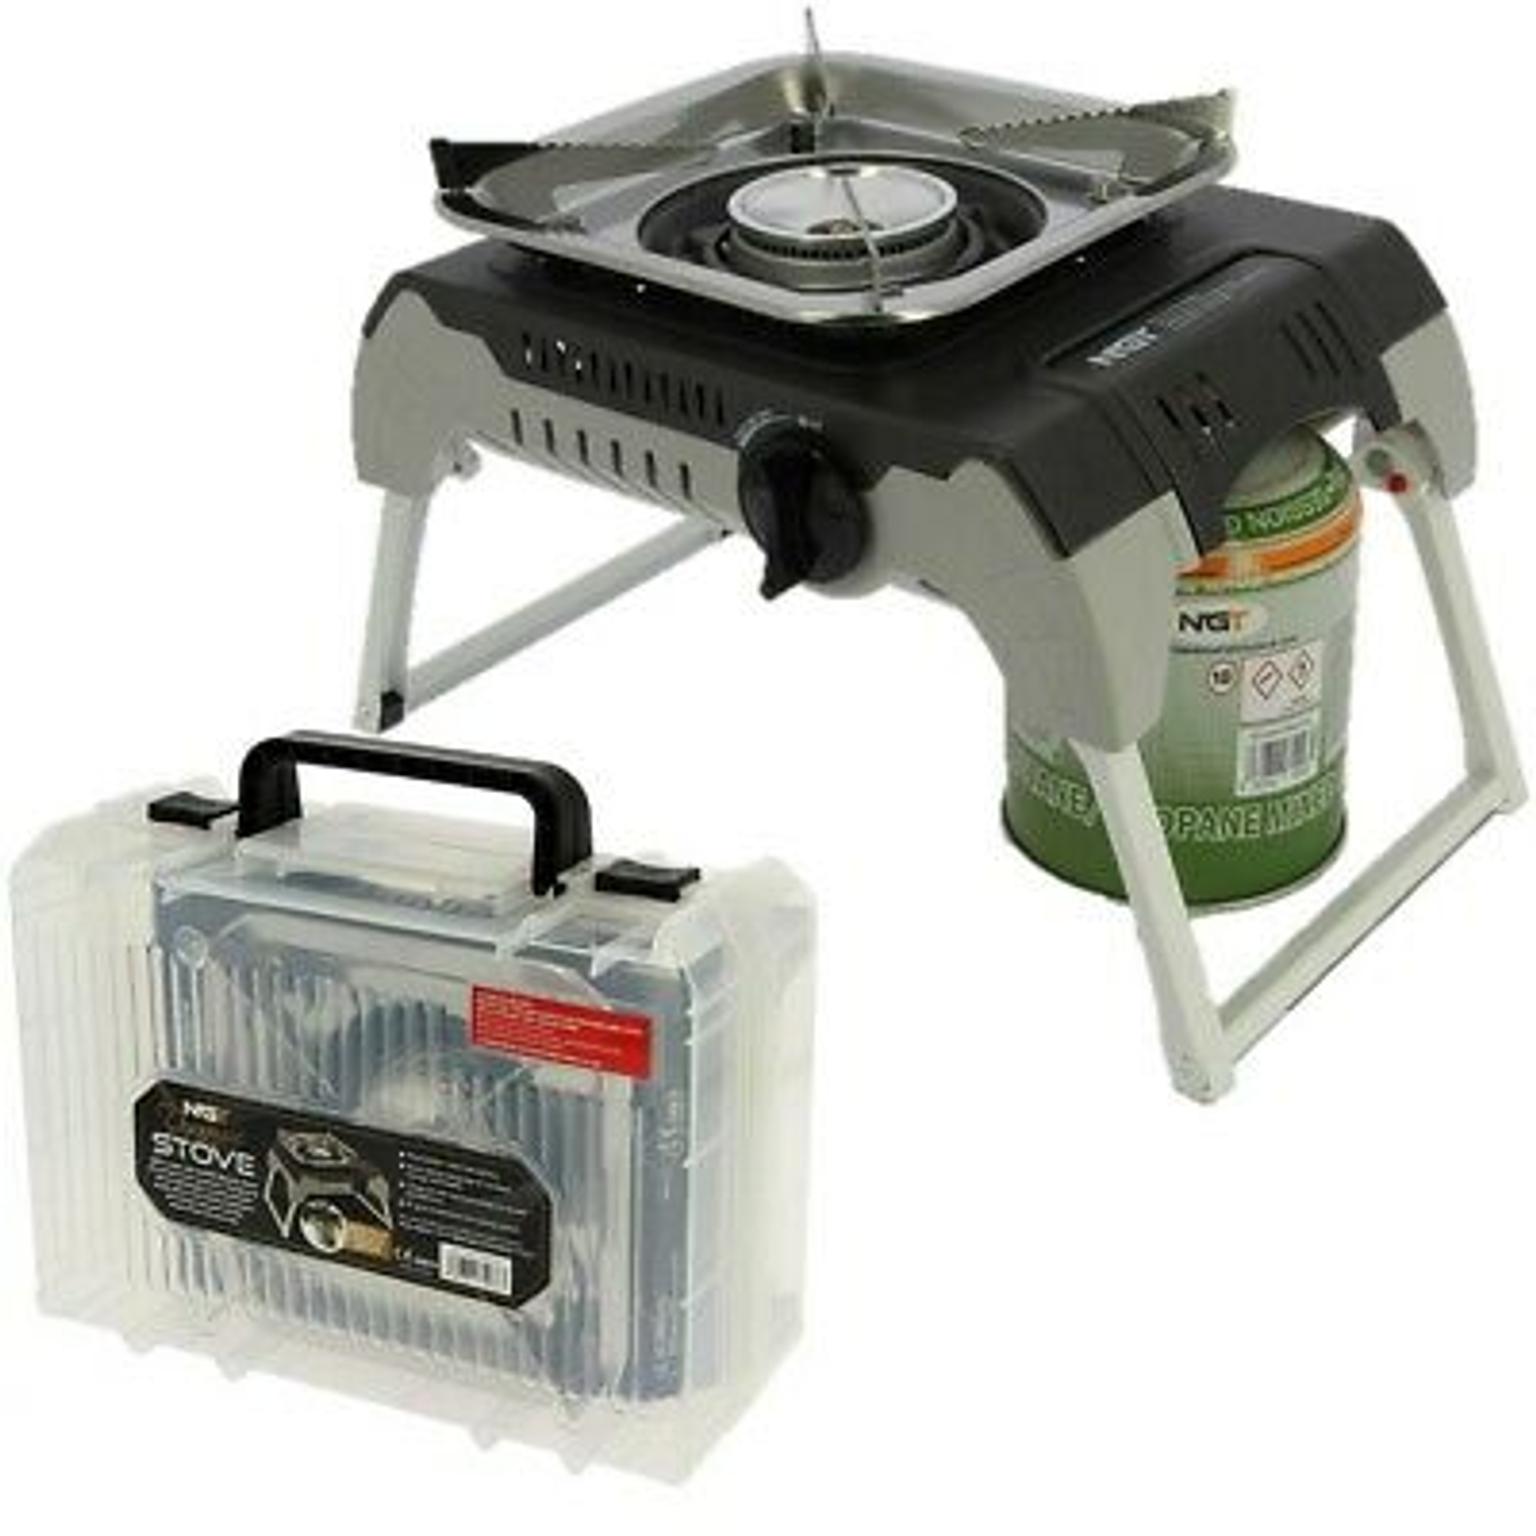 Fishing Gas Portable Stove NGT Compact High Output 3000w Camping Cooker 